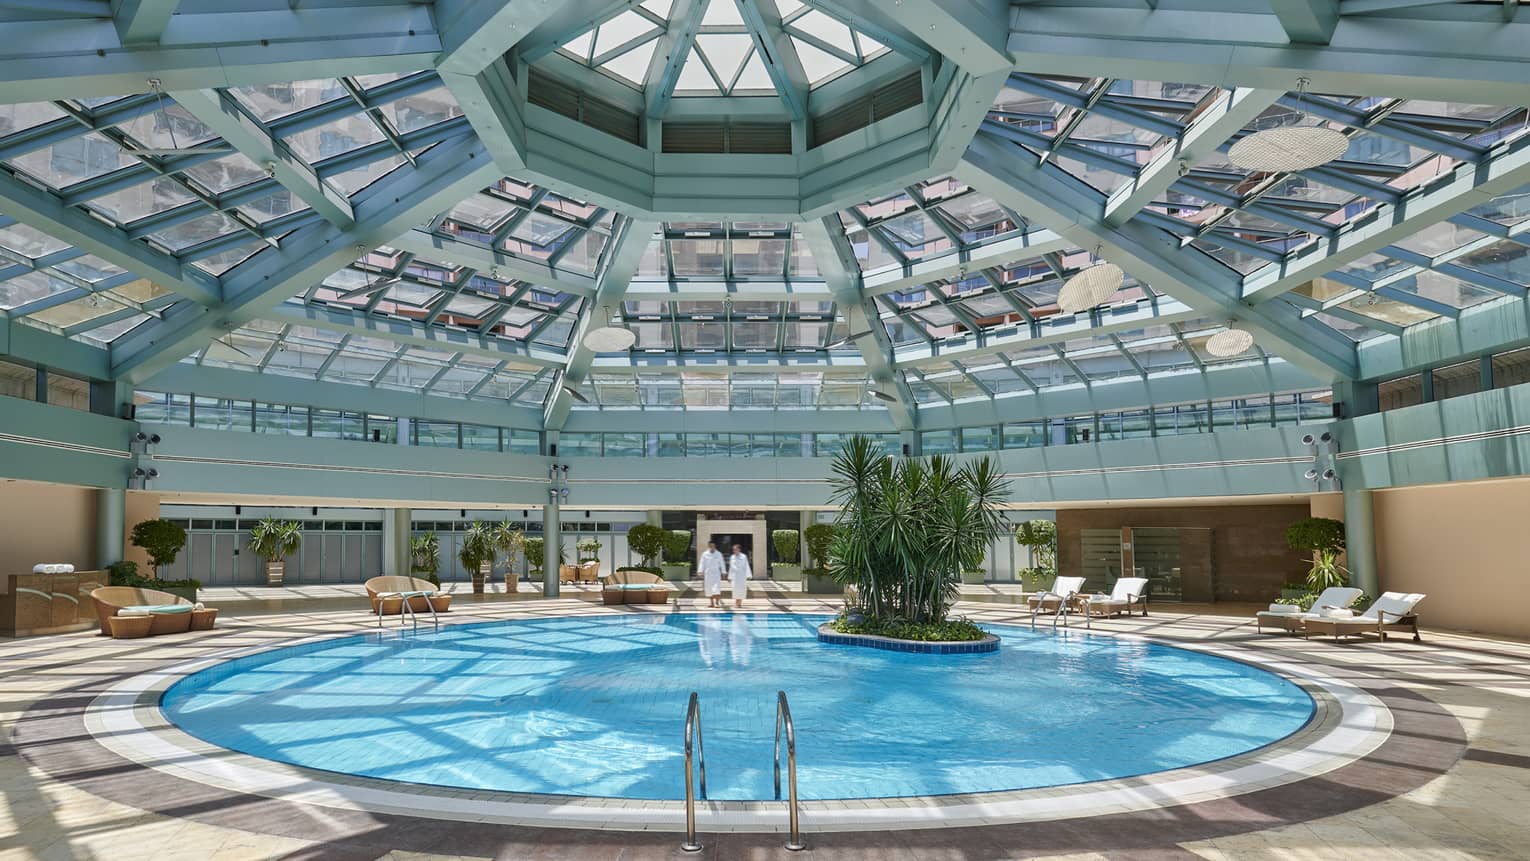 Skylights pour in natural light over the indoor pool at four seasons hotel alexandria 